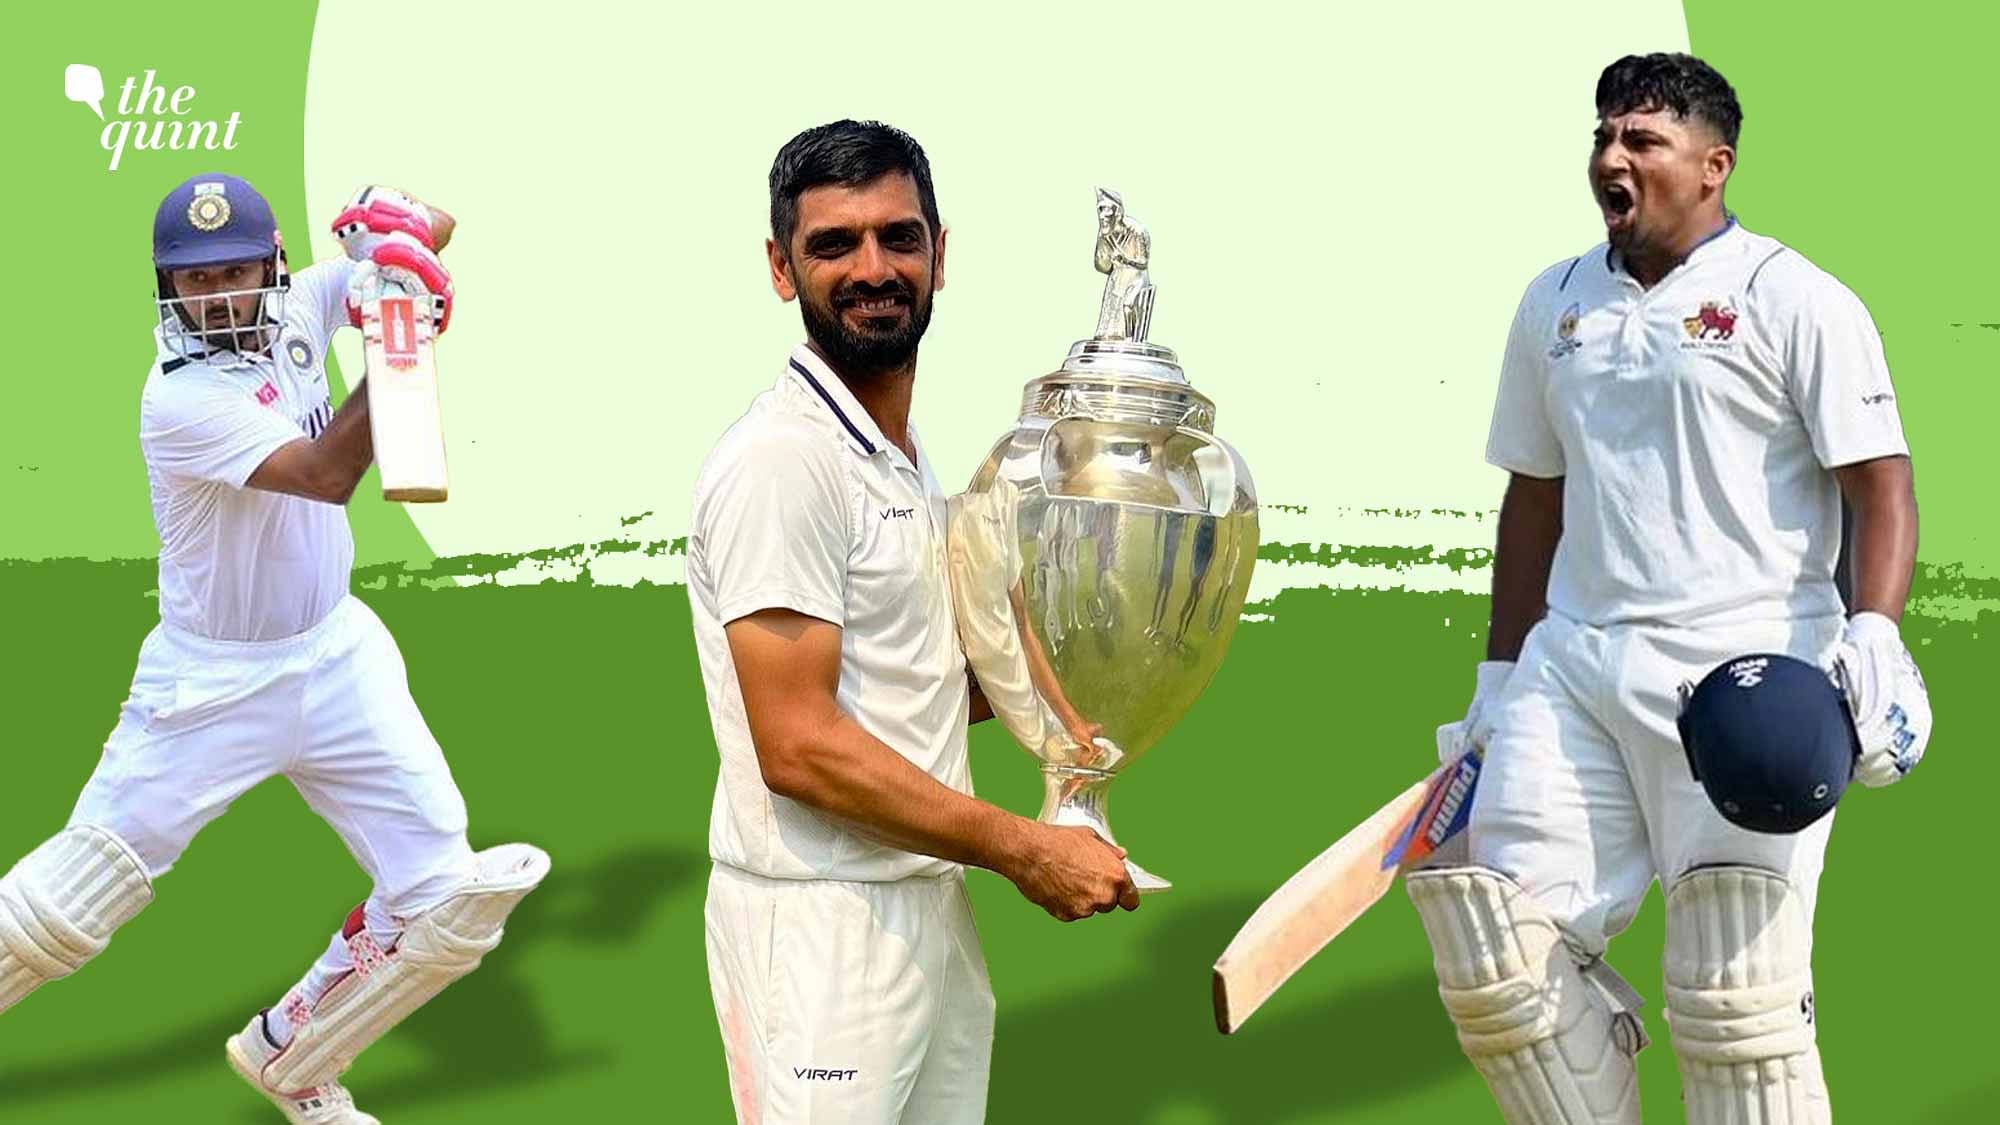 Scrap Ranji Trophy and First-Class Cricket, Because Whats the Point Anymore?